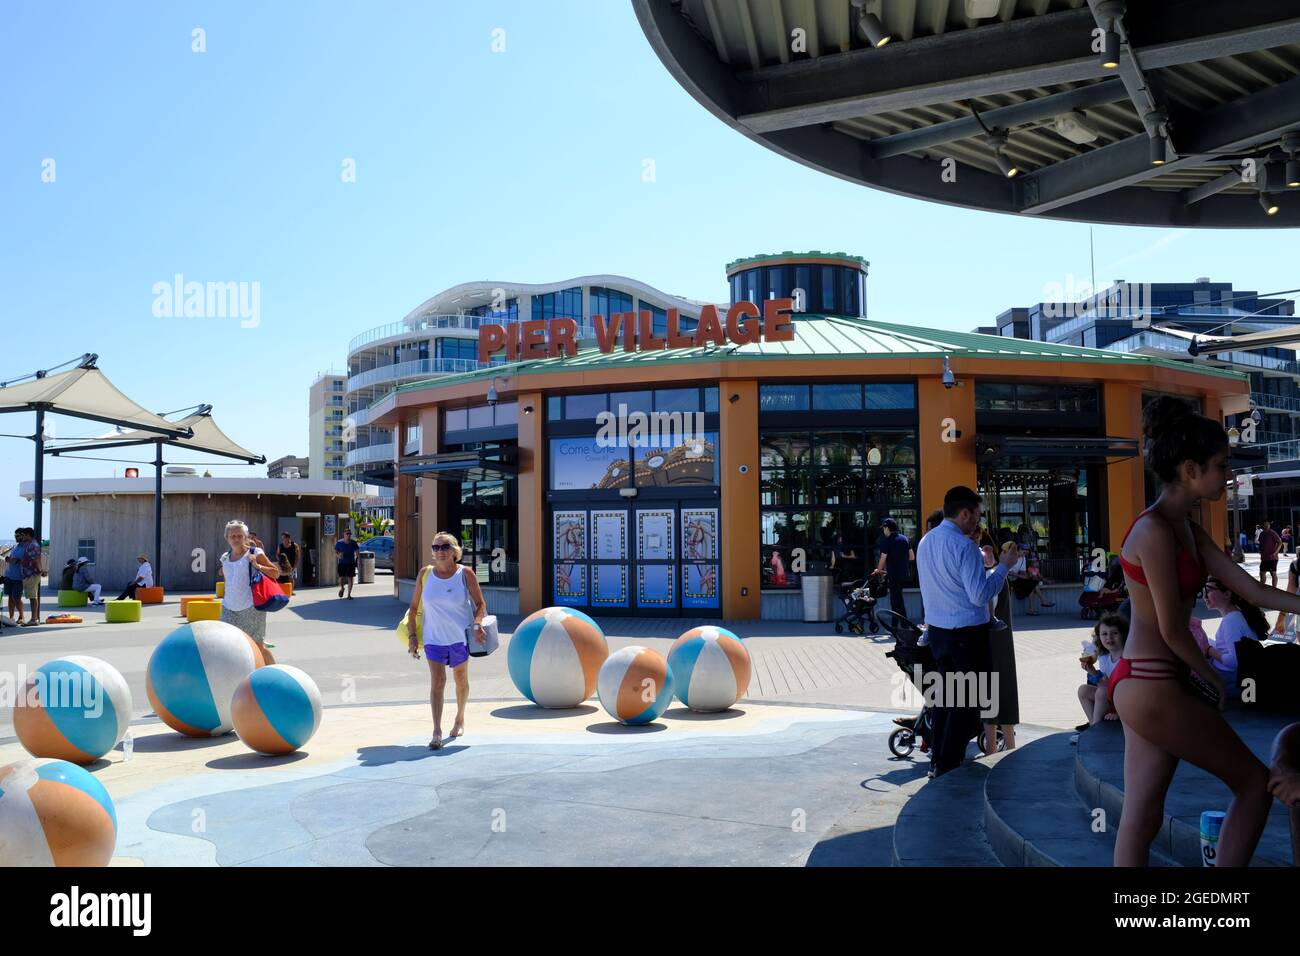 Entrance to Pier Village on the Boardwalk in Long Branch, New Jersey with  Beach Ball Sculptures Stock Photo - Alamy